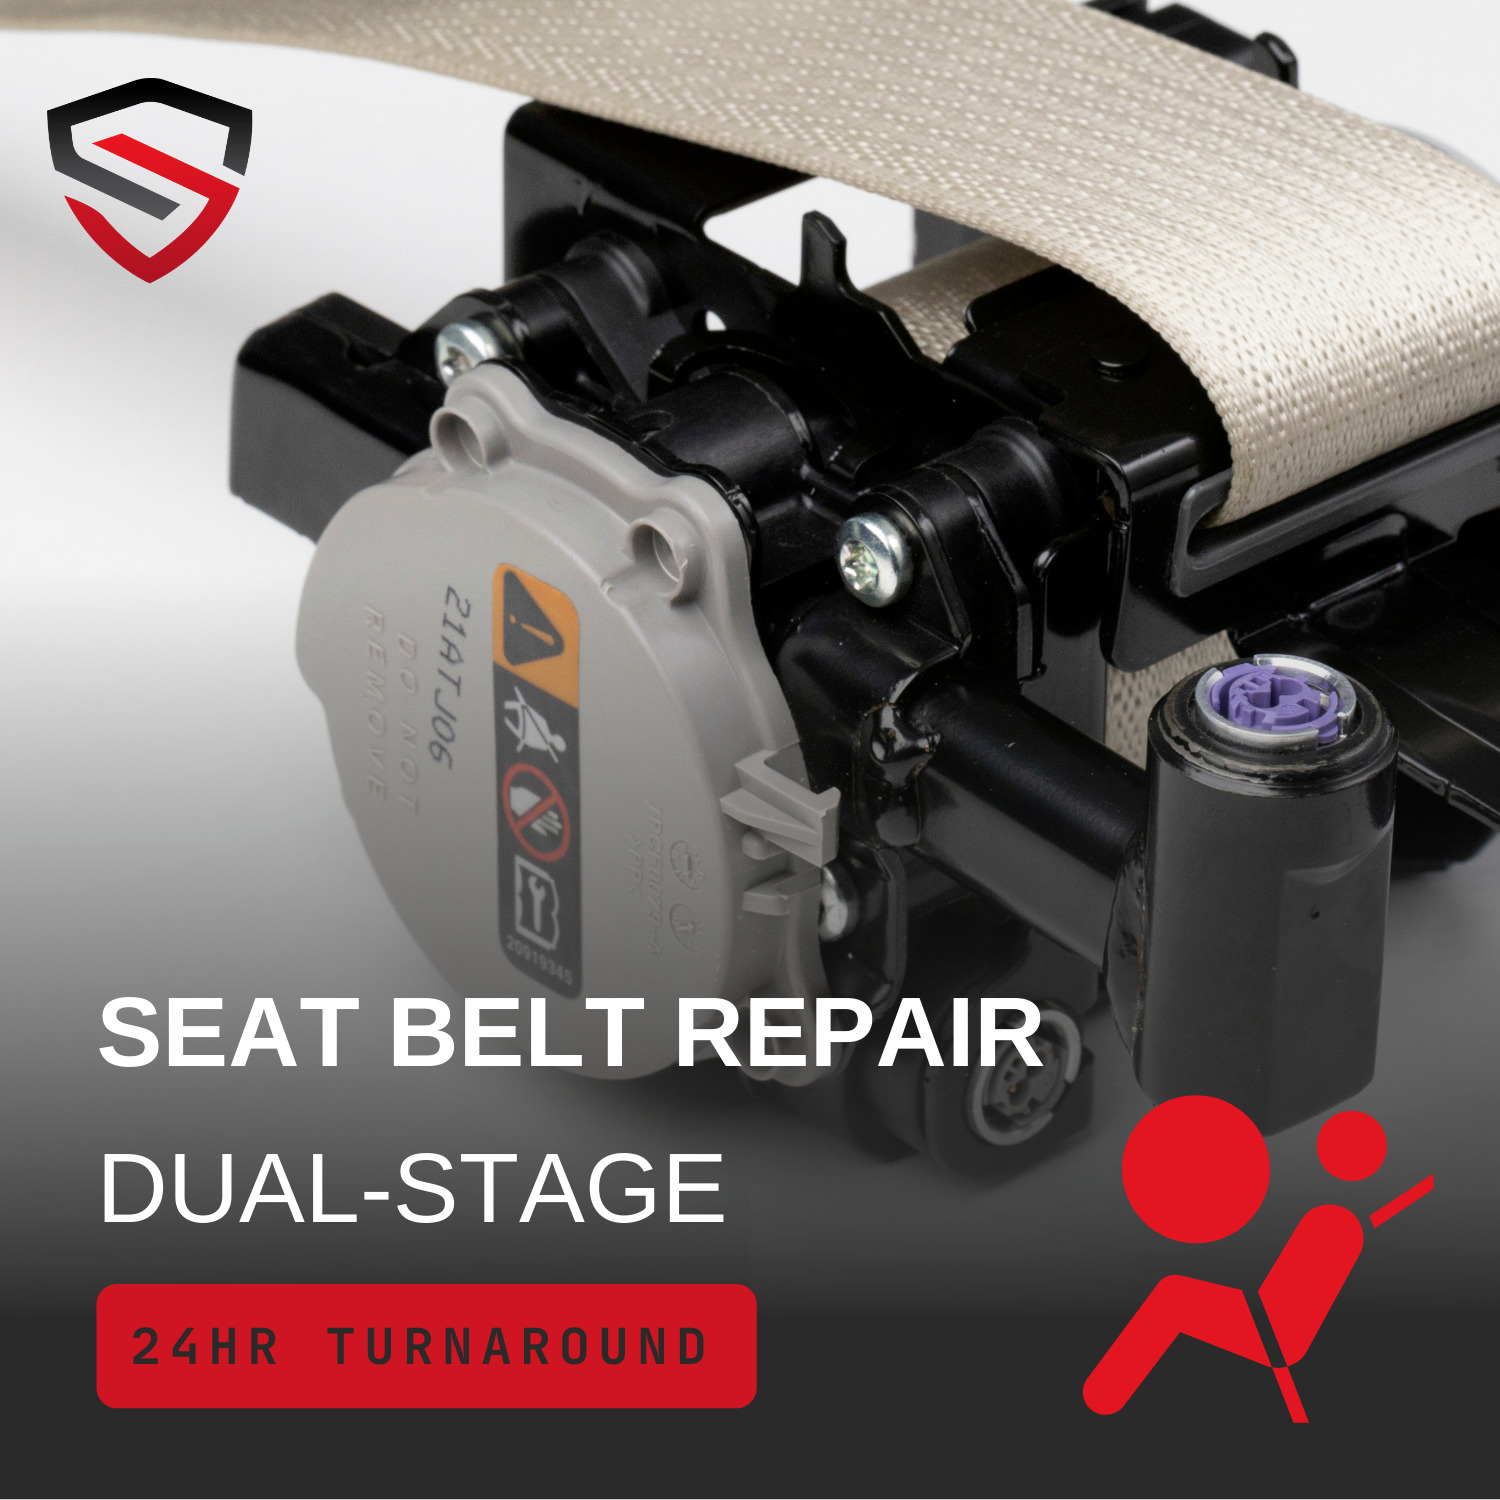 For DUAL STAGE SEAT BELT REPAIR - ALL MAKES & MODELS - Seat Belt Masters - ⭐⭐⭐⭐⭐